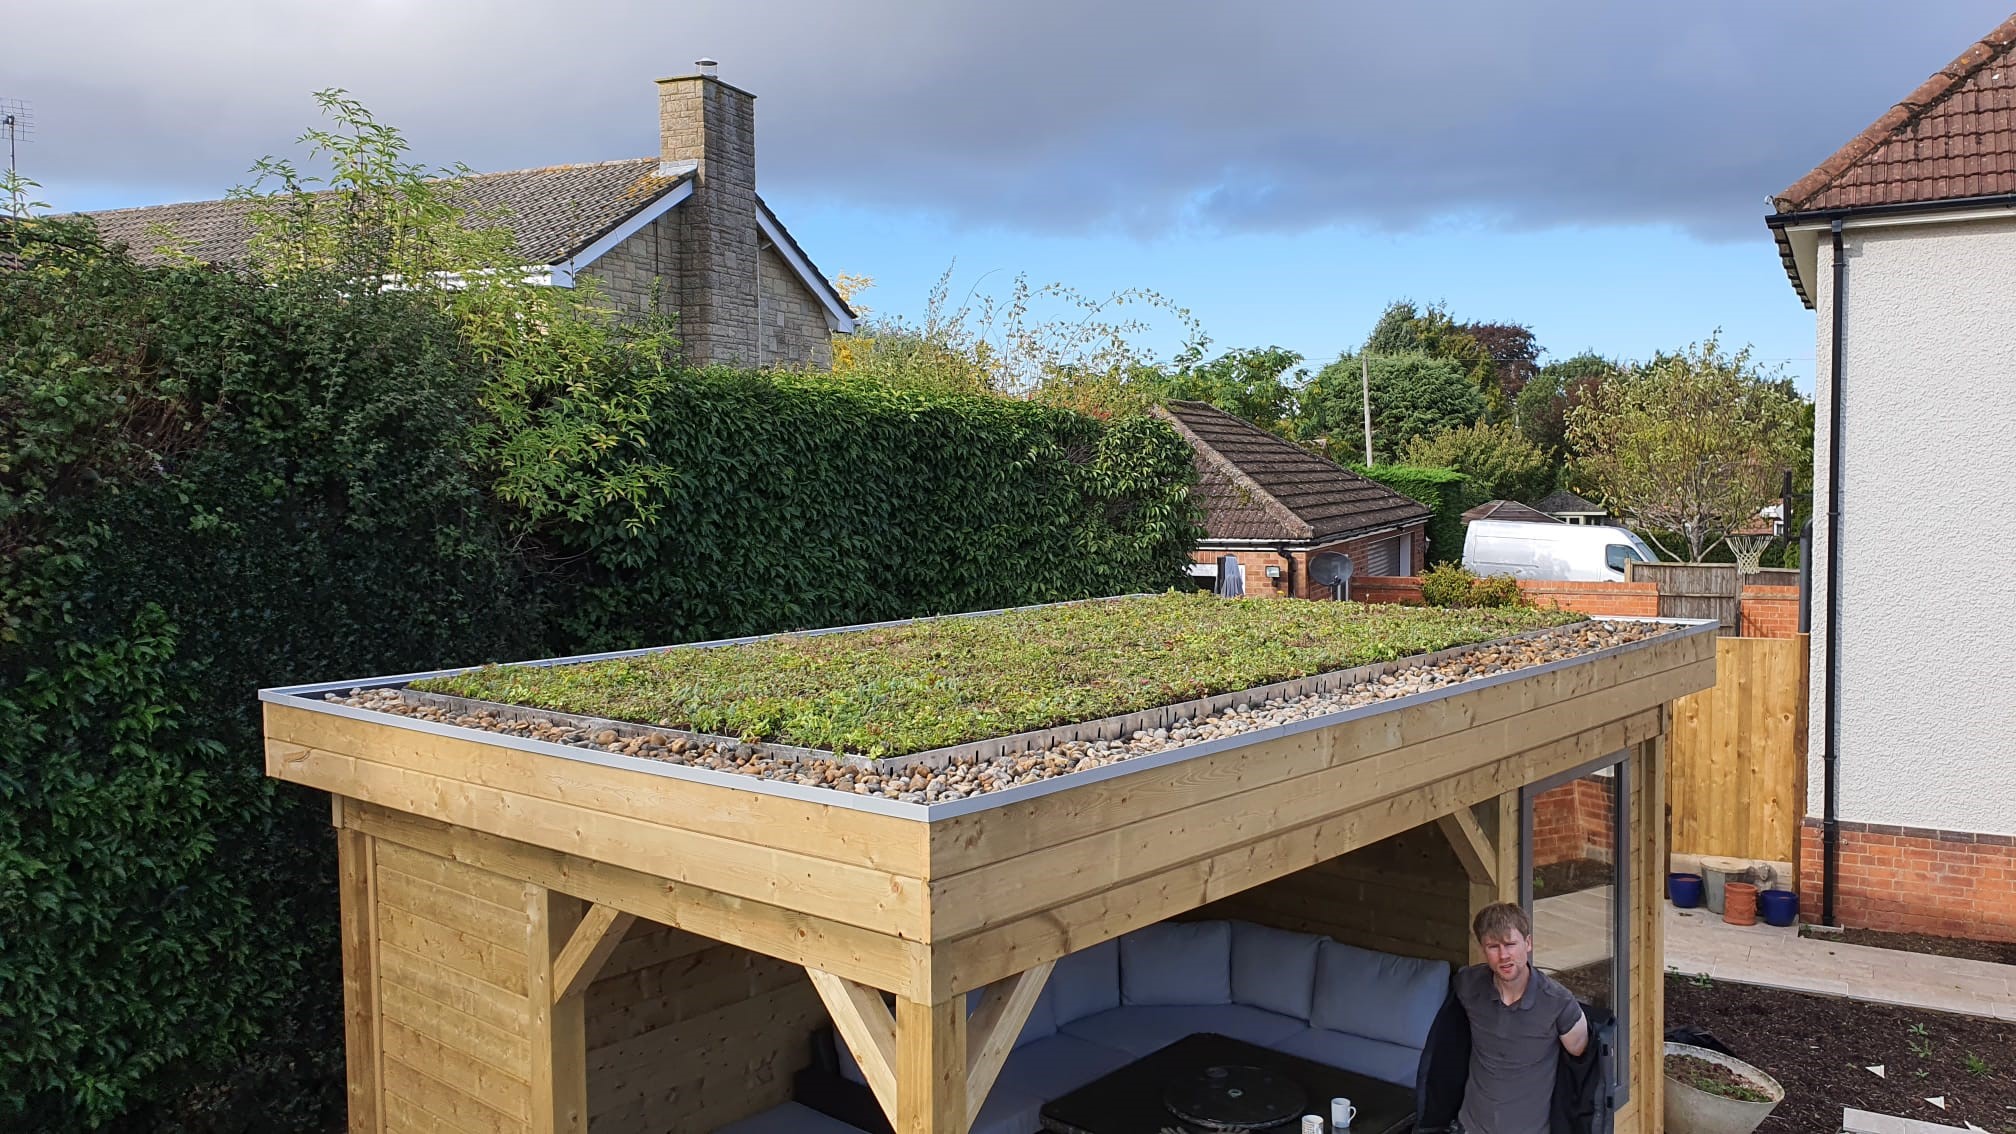 Valuing the Public Benefits of Green Roofs